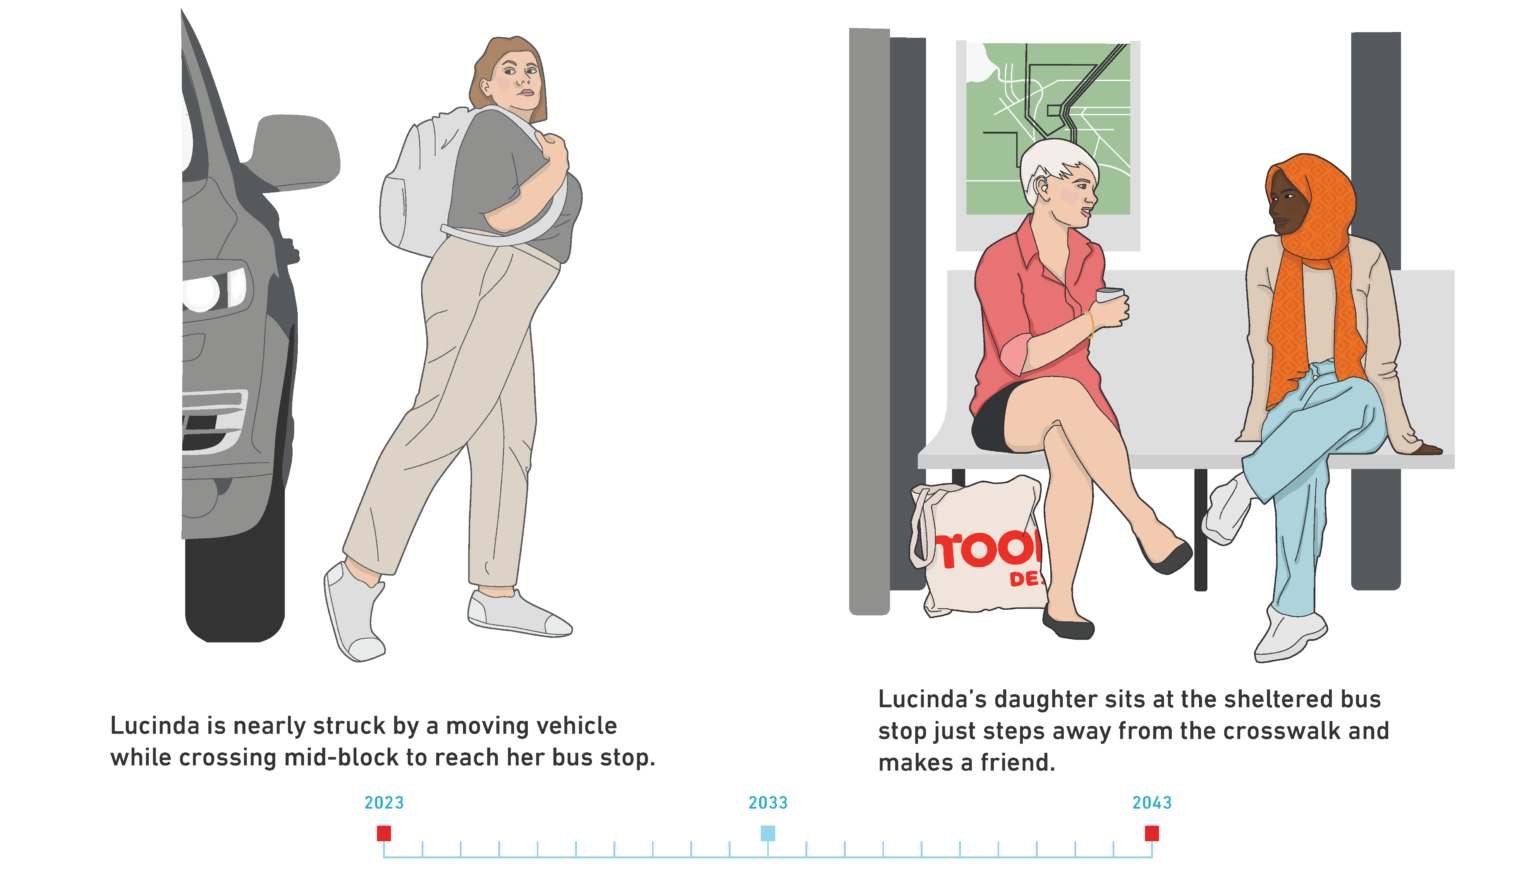 A side-by-side graphic showing a person nearly struck by a vehicle in 2023 and two people chatting at a bus stop in 2043